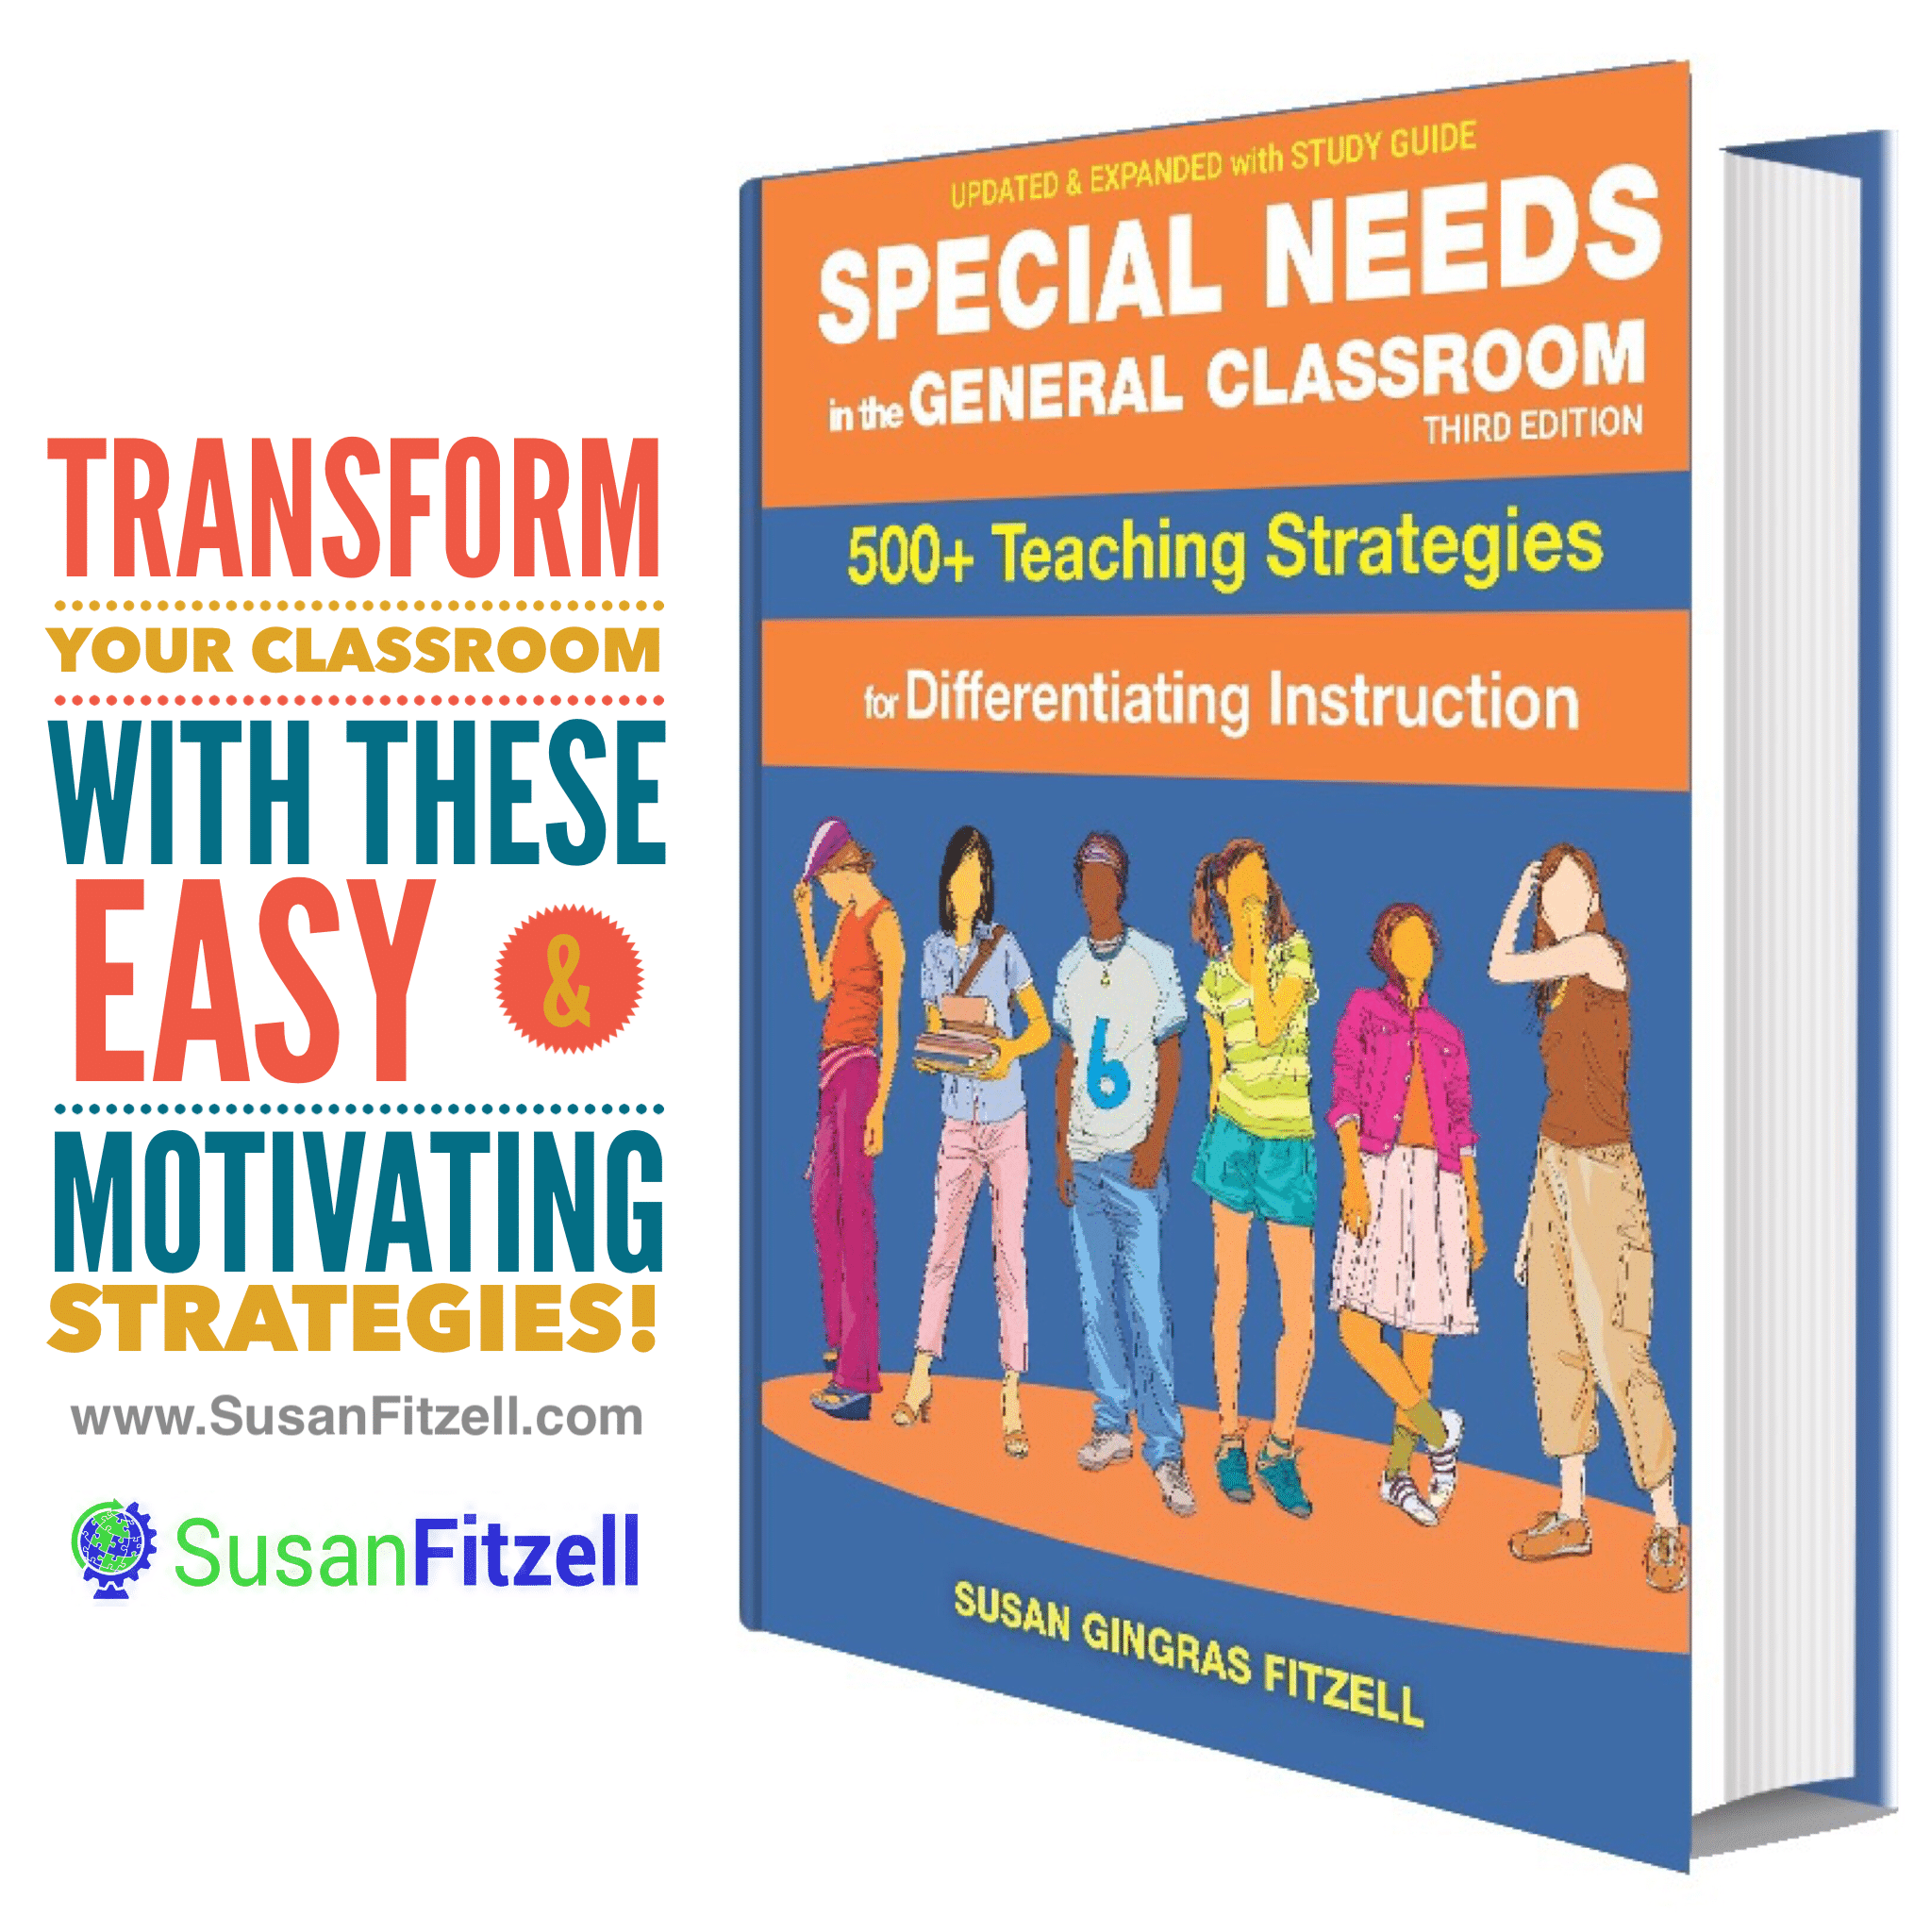 Special Needs and Differentiation